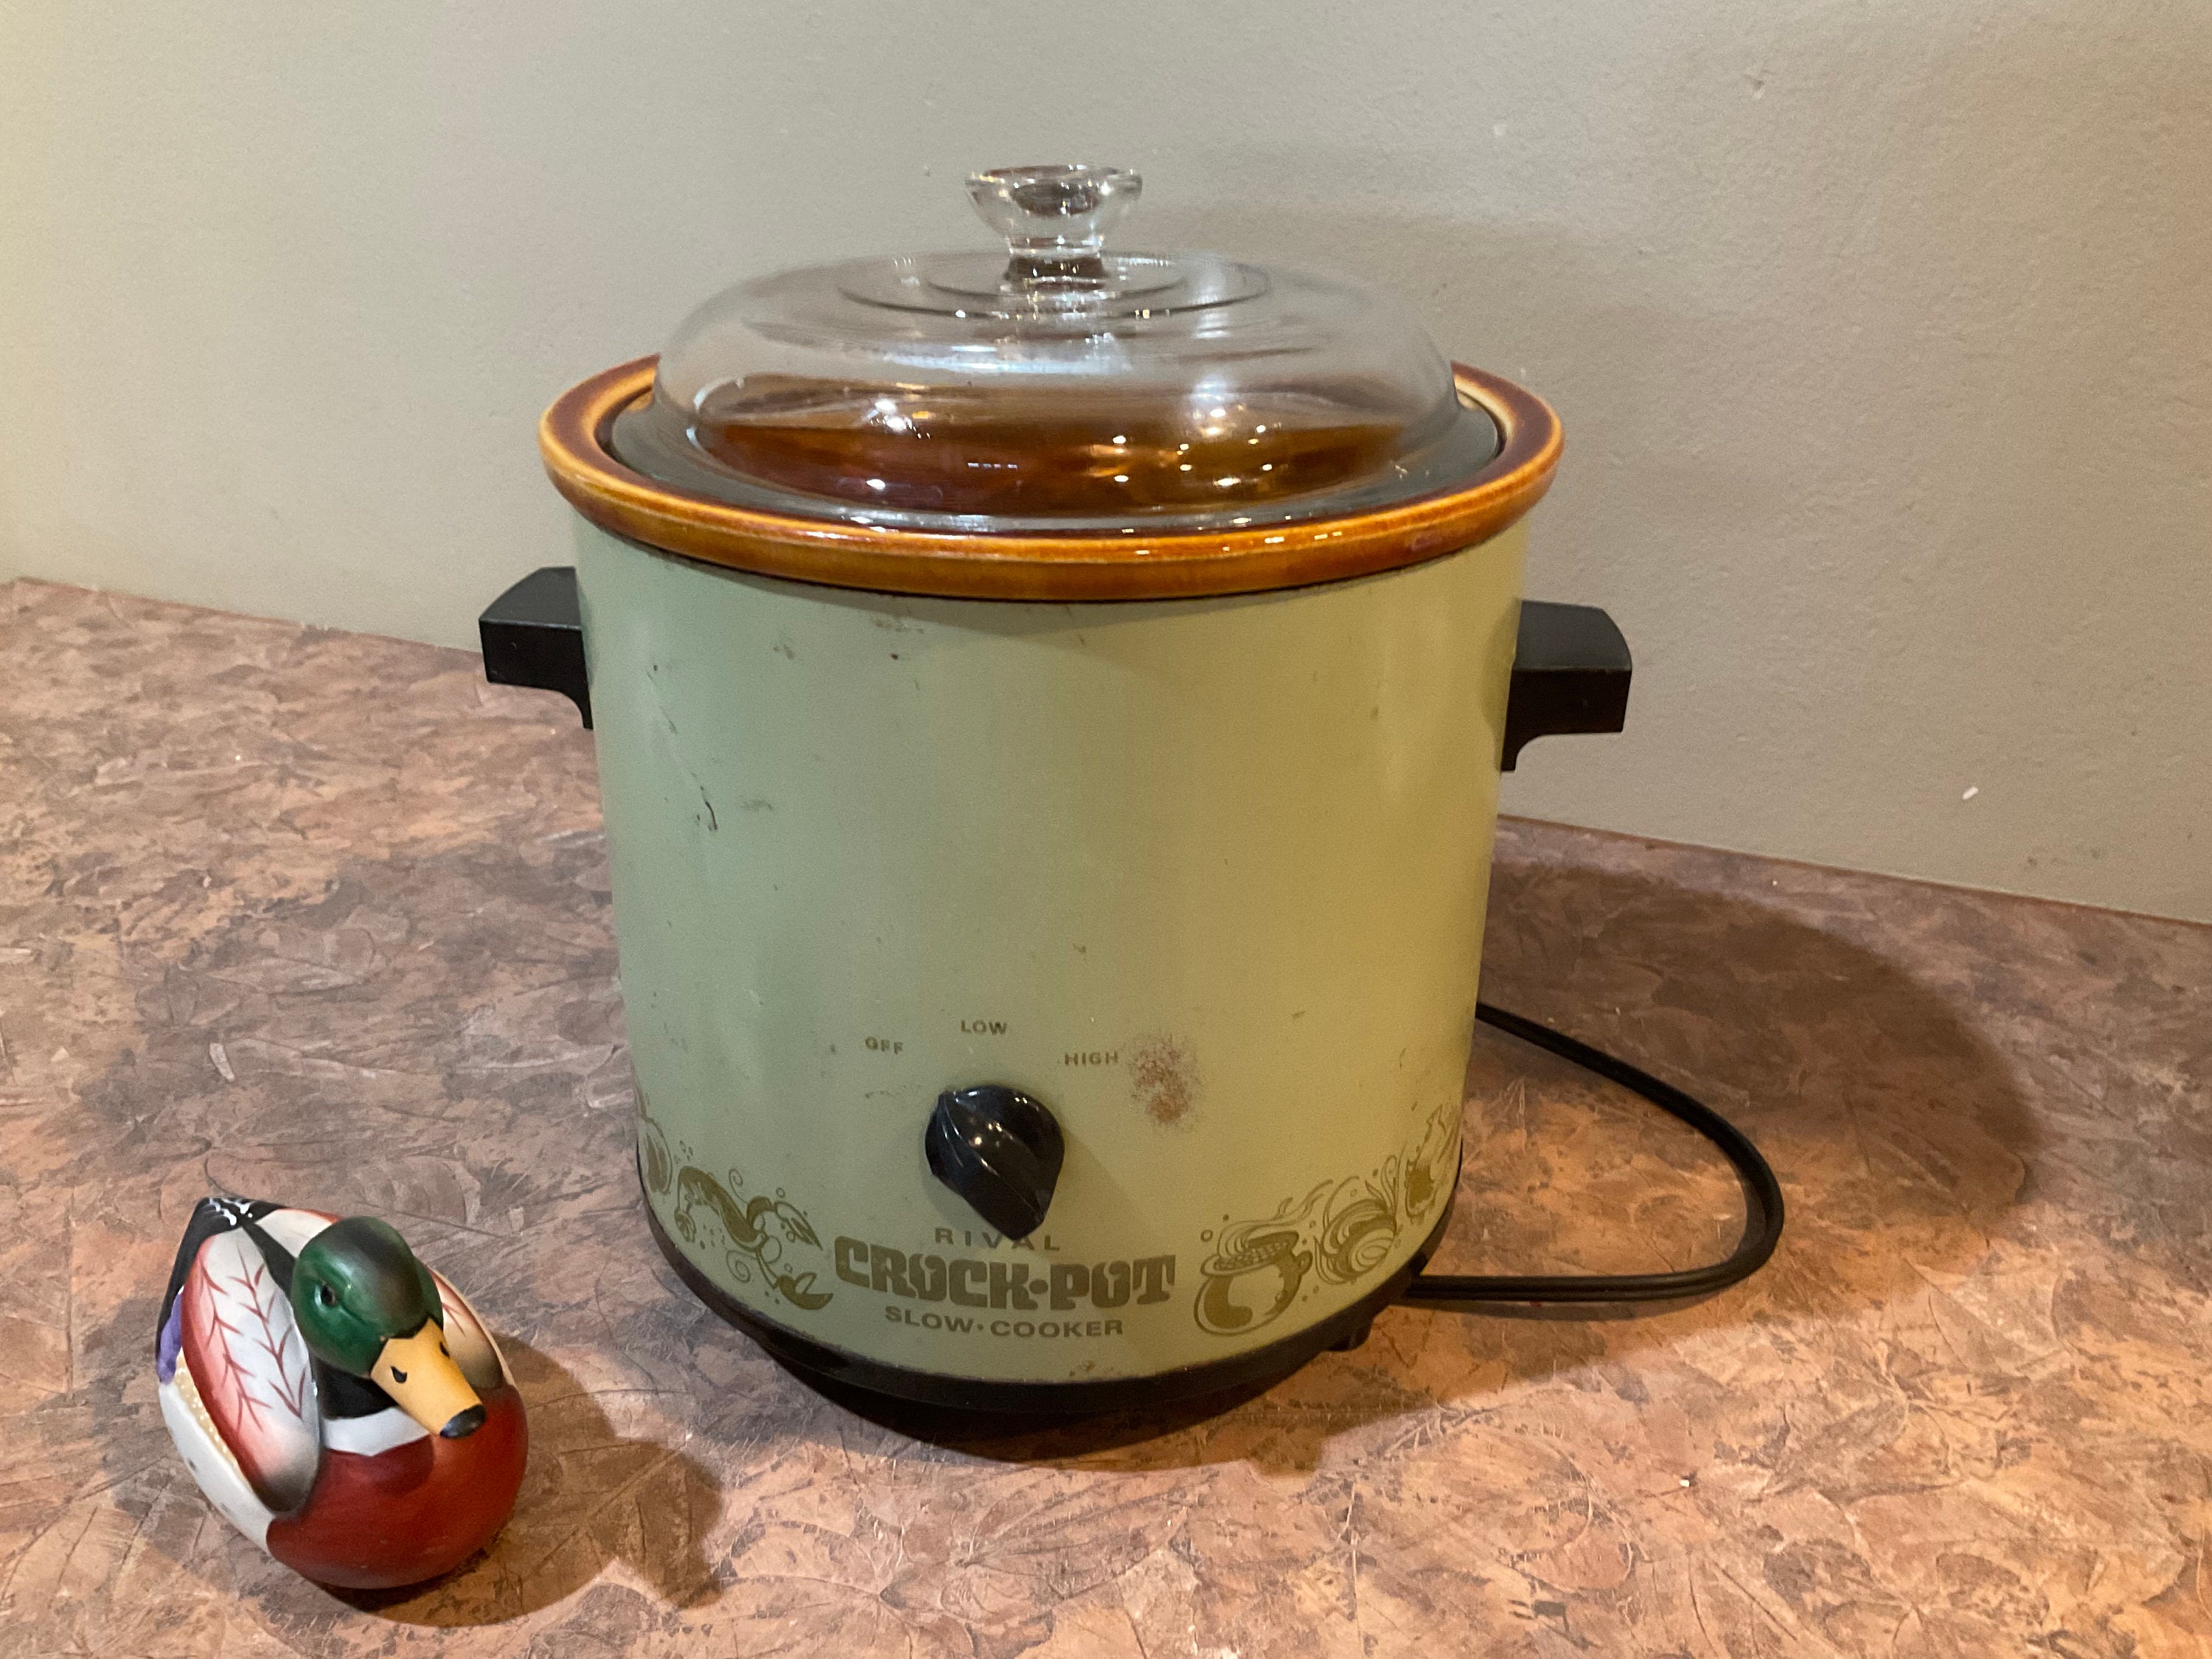 Rival Crockpot Slow Cooker - Sherwood Auctions